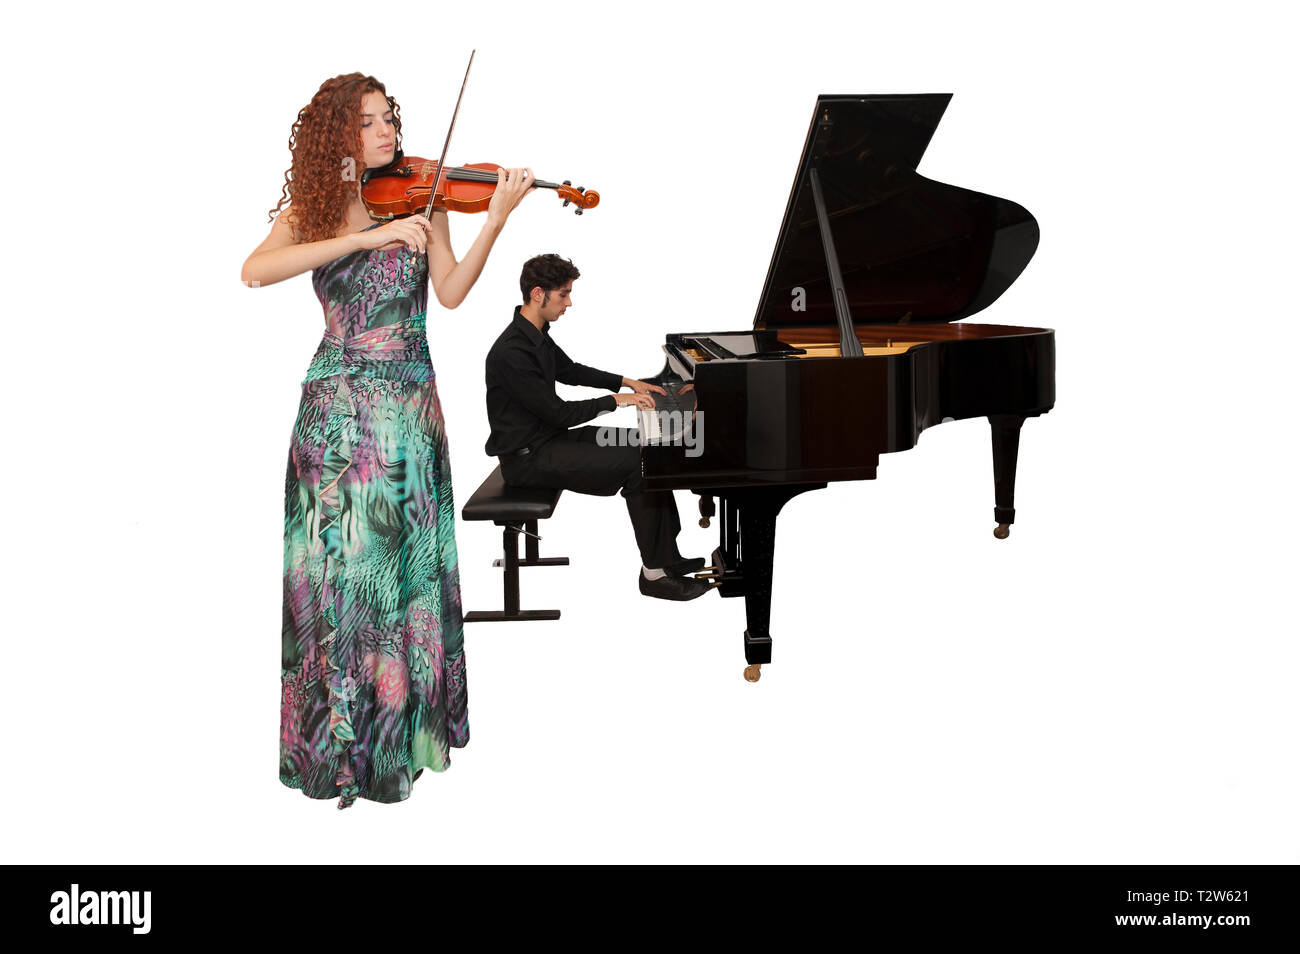 State Conservatory of Music Giuseppe Verdi of Turin duet on the left Giulia Subba plays the violin and on the right Davide Cava plays the piano Stock Photo